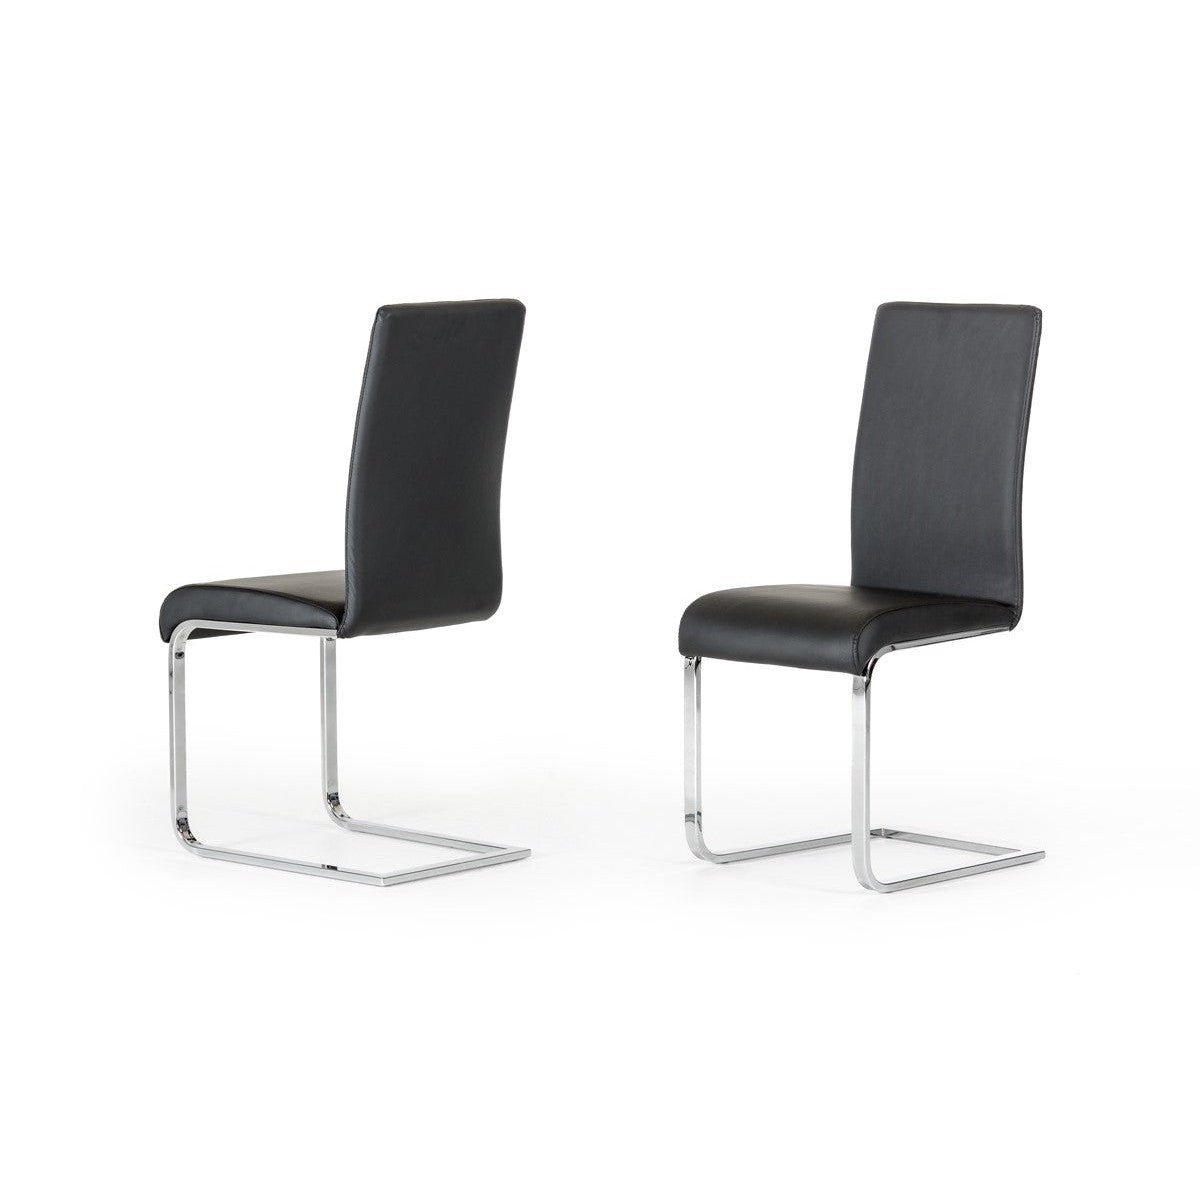 HomeRoots 38" Black Leatherette And Metal Dining Chairs, Set of 2